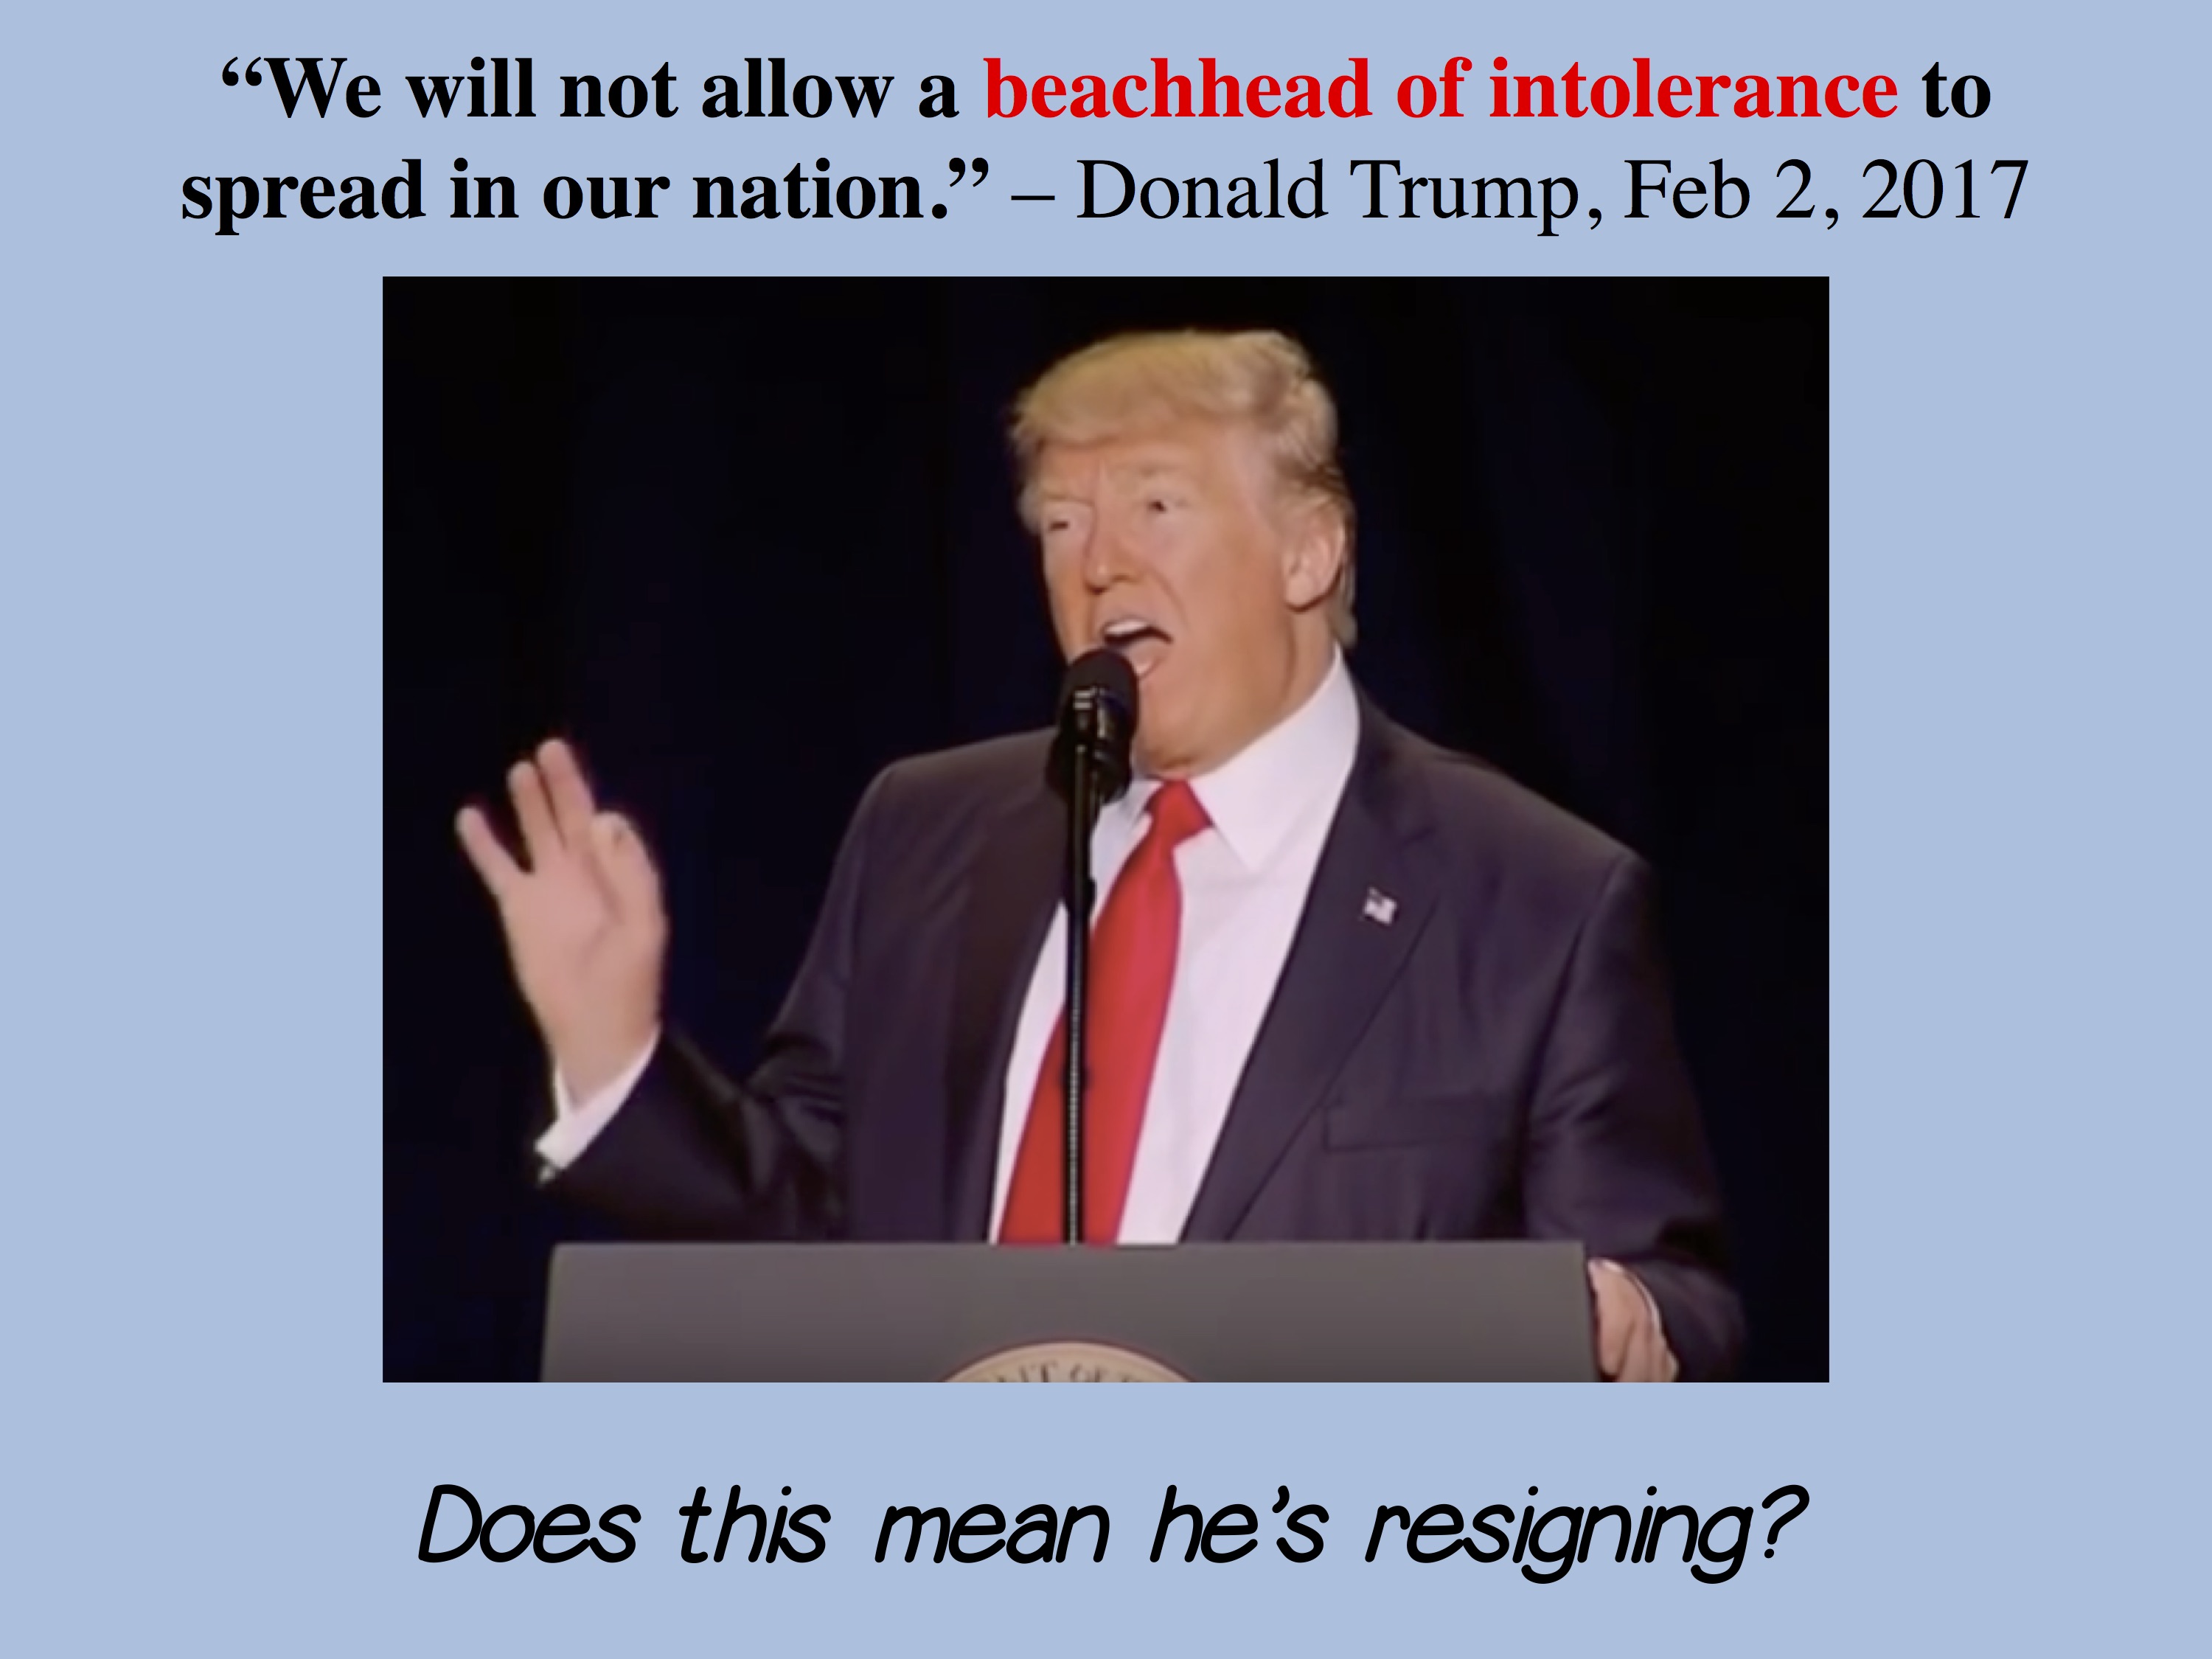 Trump and Intolerance, Does this mean he's resigning?